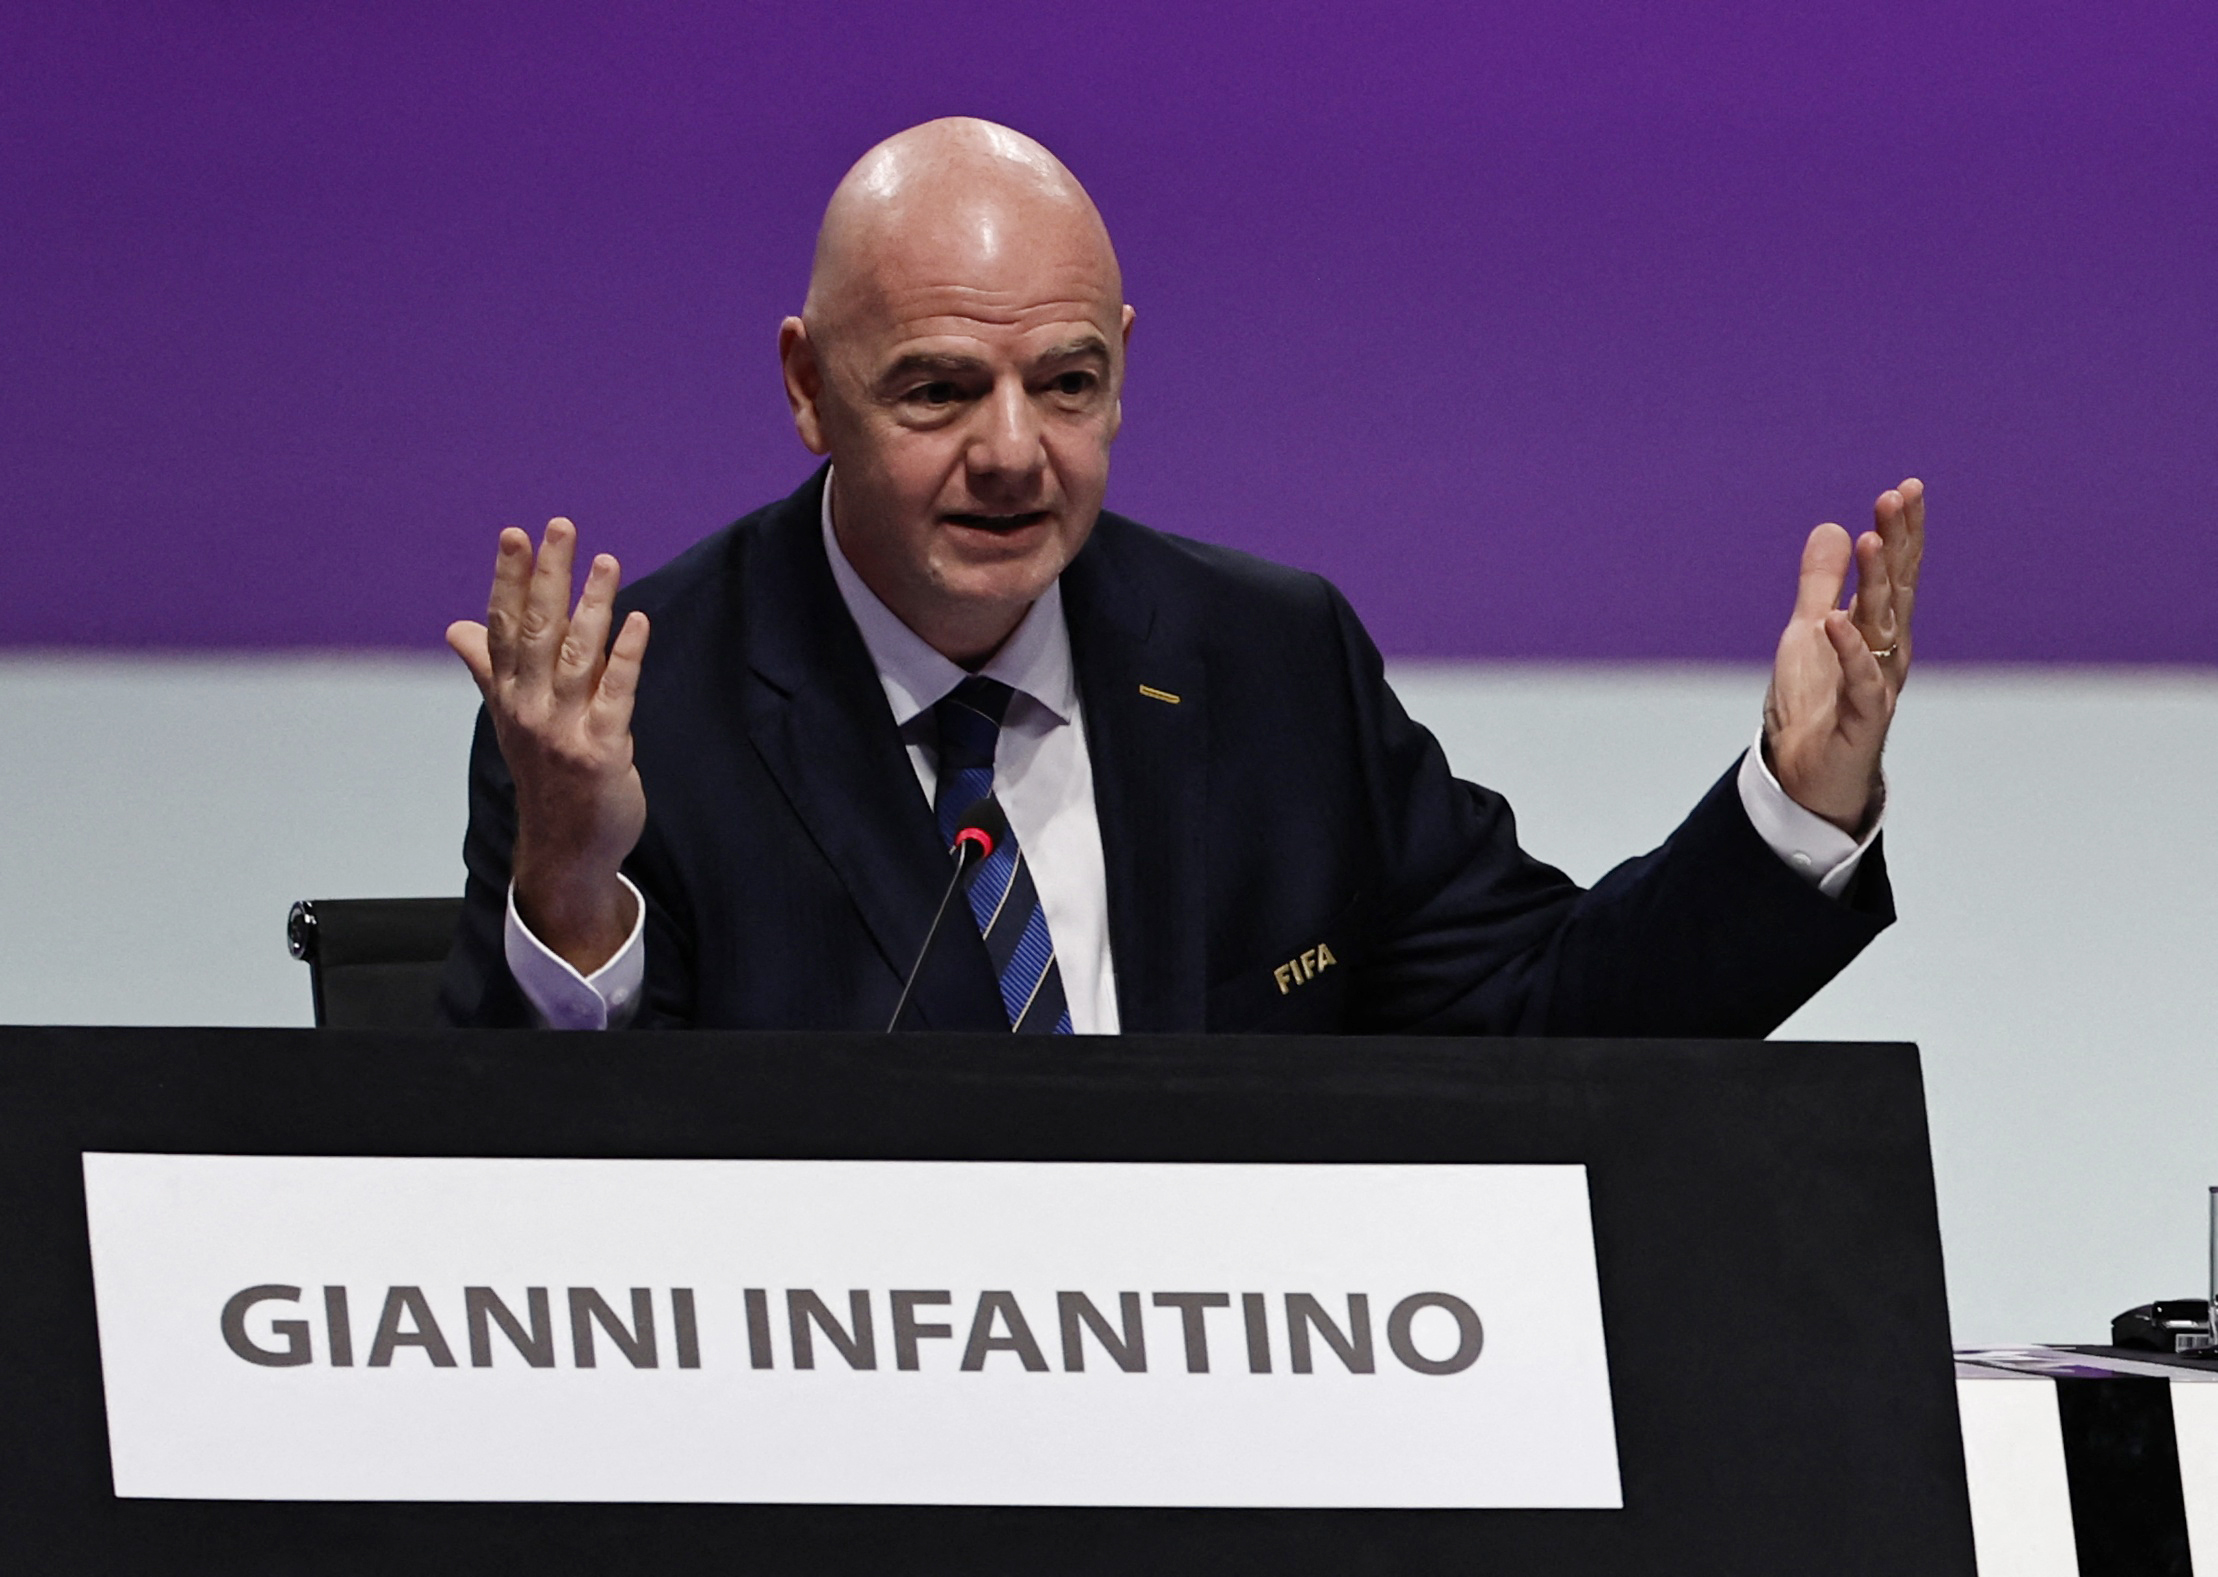 Soccer Football - 72nd FIFA Congress - Doha Exhibition & Convention Center, Doha, Qatar - March 31, 2022 FIFA president Gianni Infantino reacts during the FIFA Congress REUTERS/Hamad I Mohammed